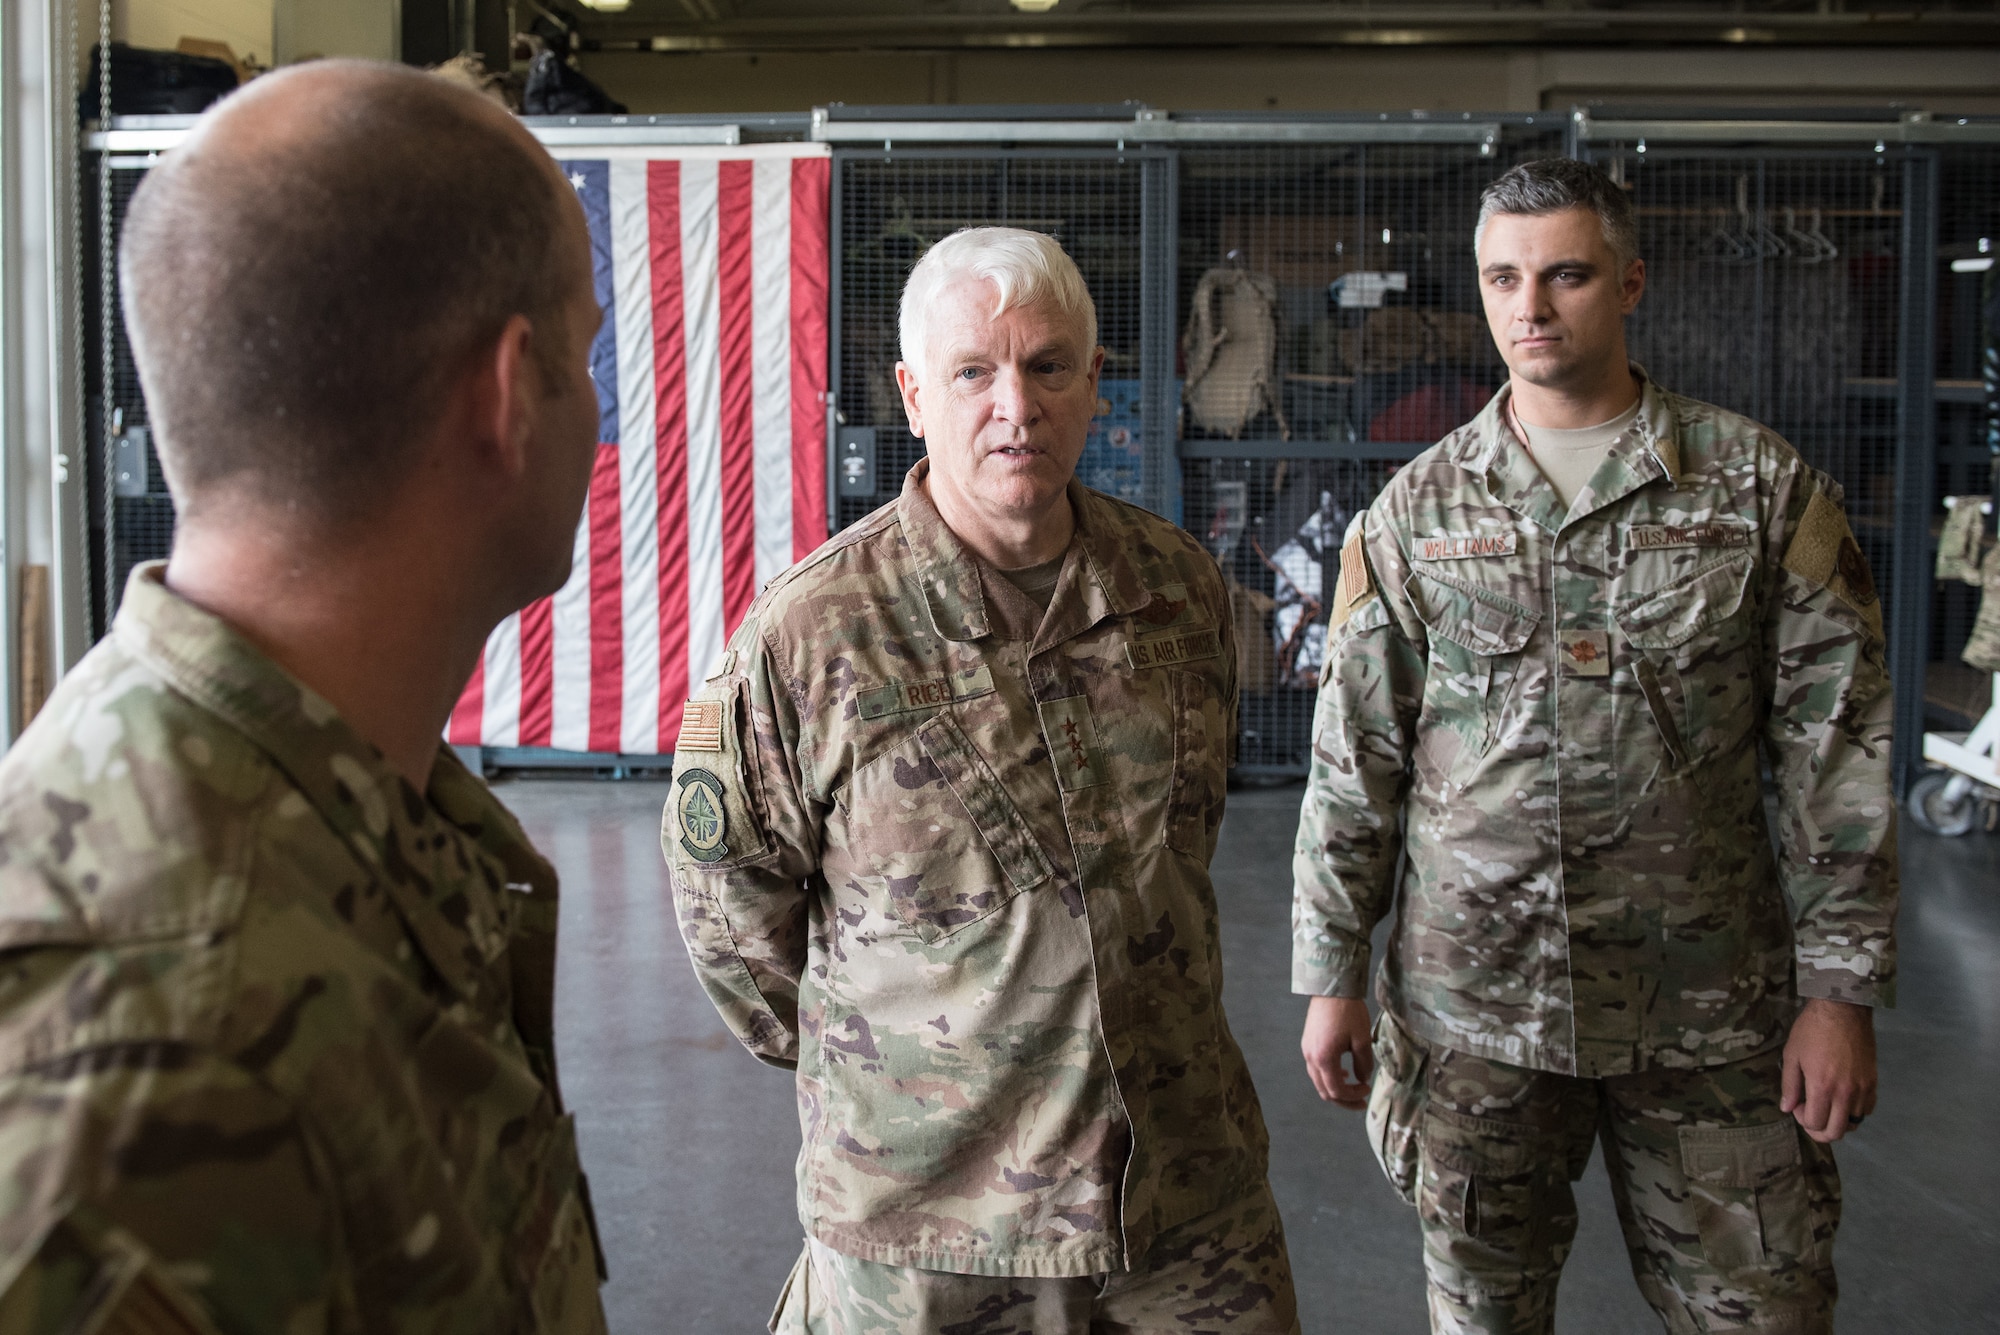 Lt. Gen. L. Scott Rice, director of the Air National Guard, speaks with members of the 123rd Special Tactics Squadron during a tour of the Kentucky Air National Guard Base in Louisville, Ky. Aug. 10, 2019. Rice also conducted a town hall meeting and answered questions posed by Kentucky Air Guardsmen. (U.S. Air National Guard photo by Dale Greer)